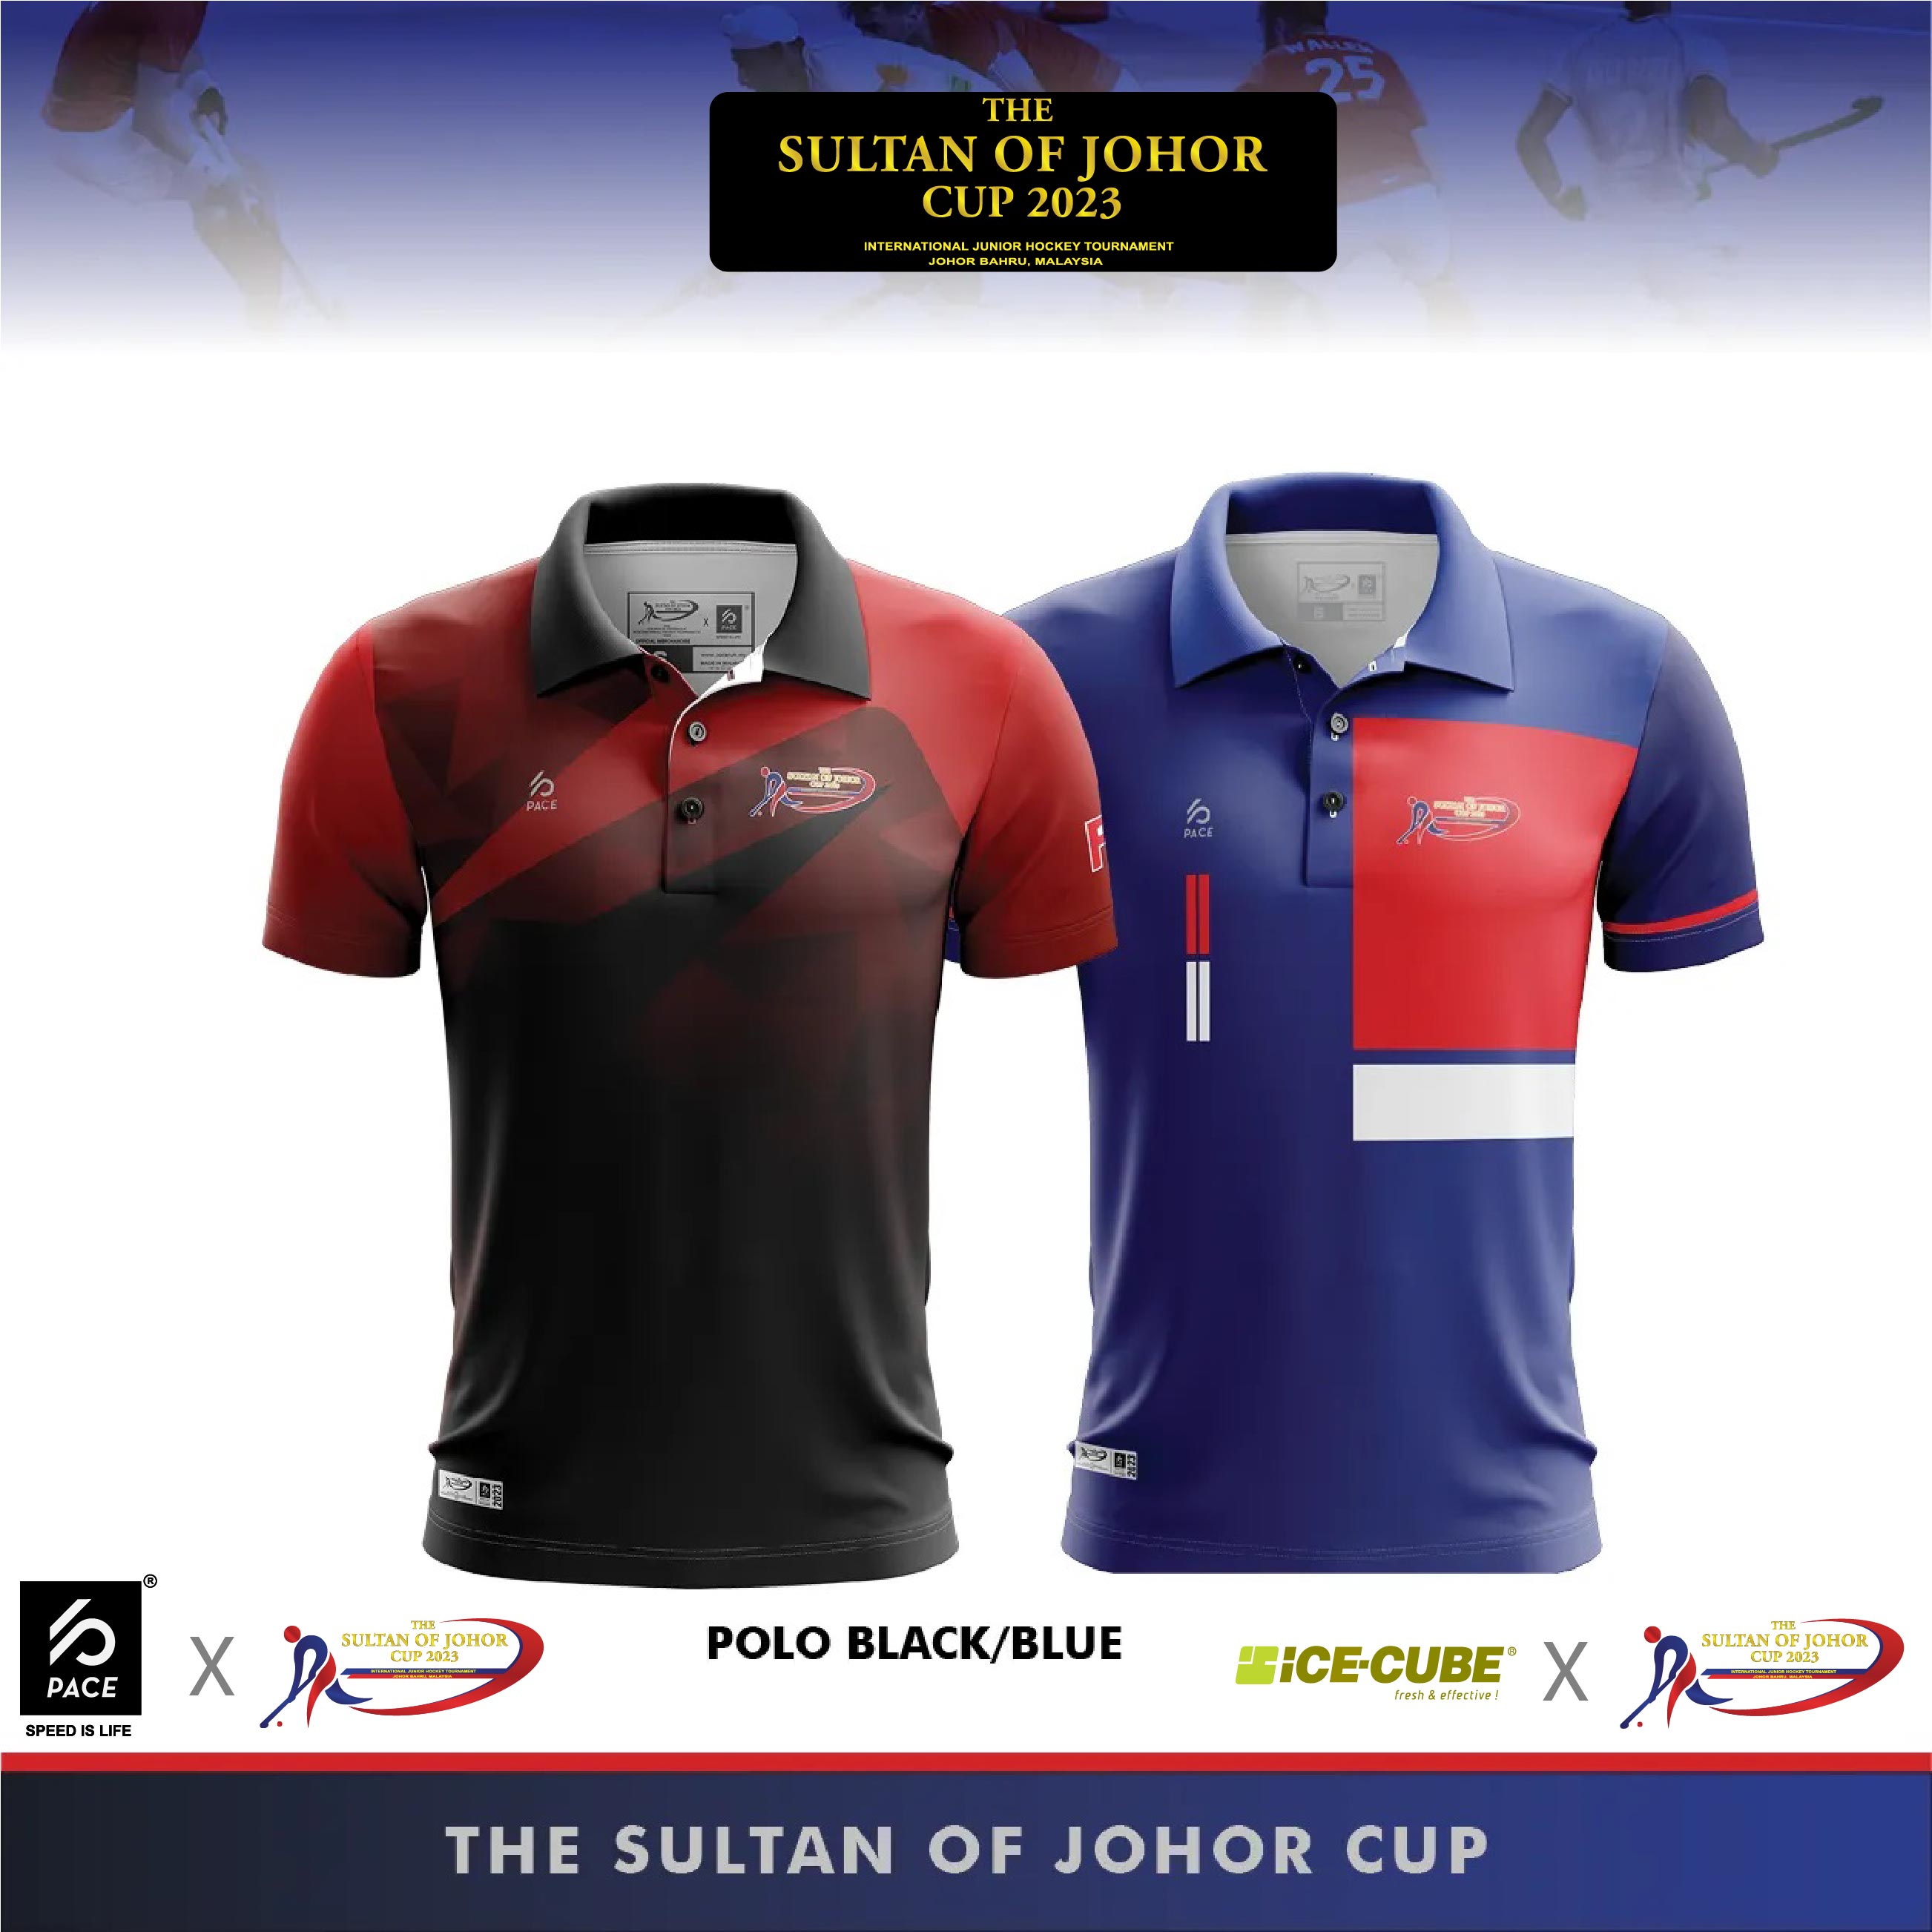 THE SULTAN OF JOHOR CUP - POLO